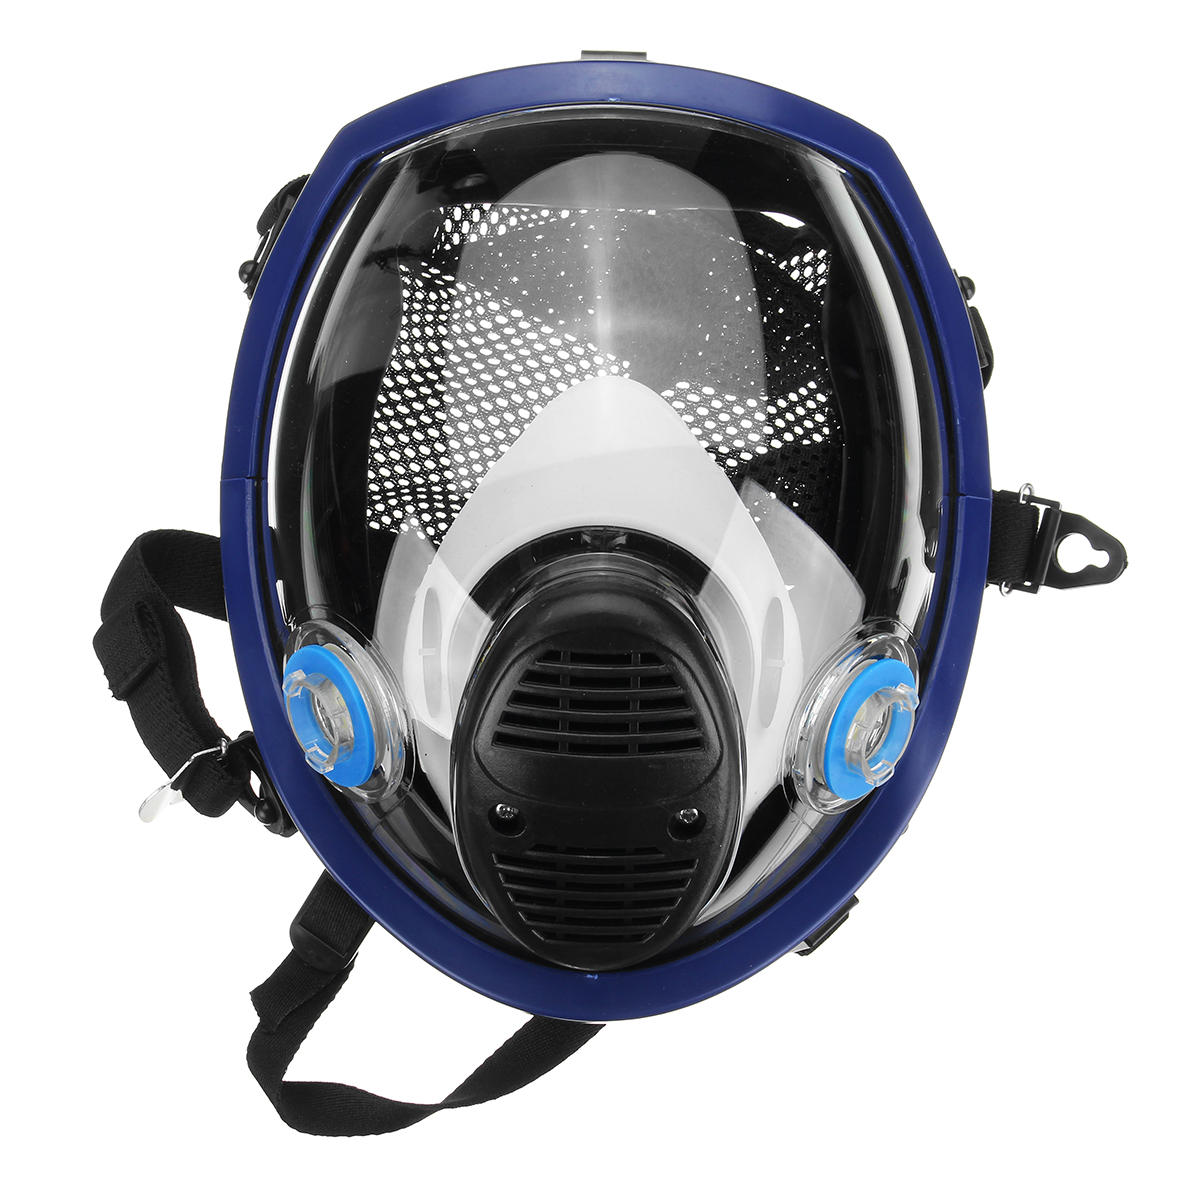 15 in 1 Large Gas Mask Full Face Facepiece Respirator For 6800 Painting Spraying 